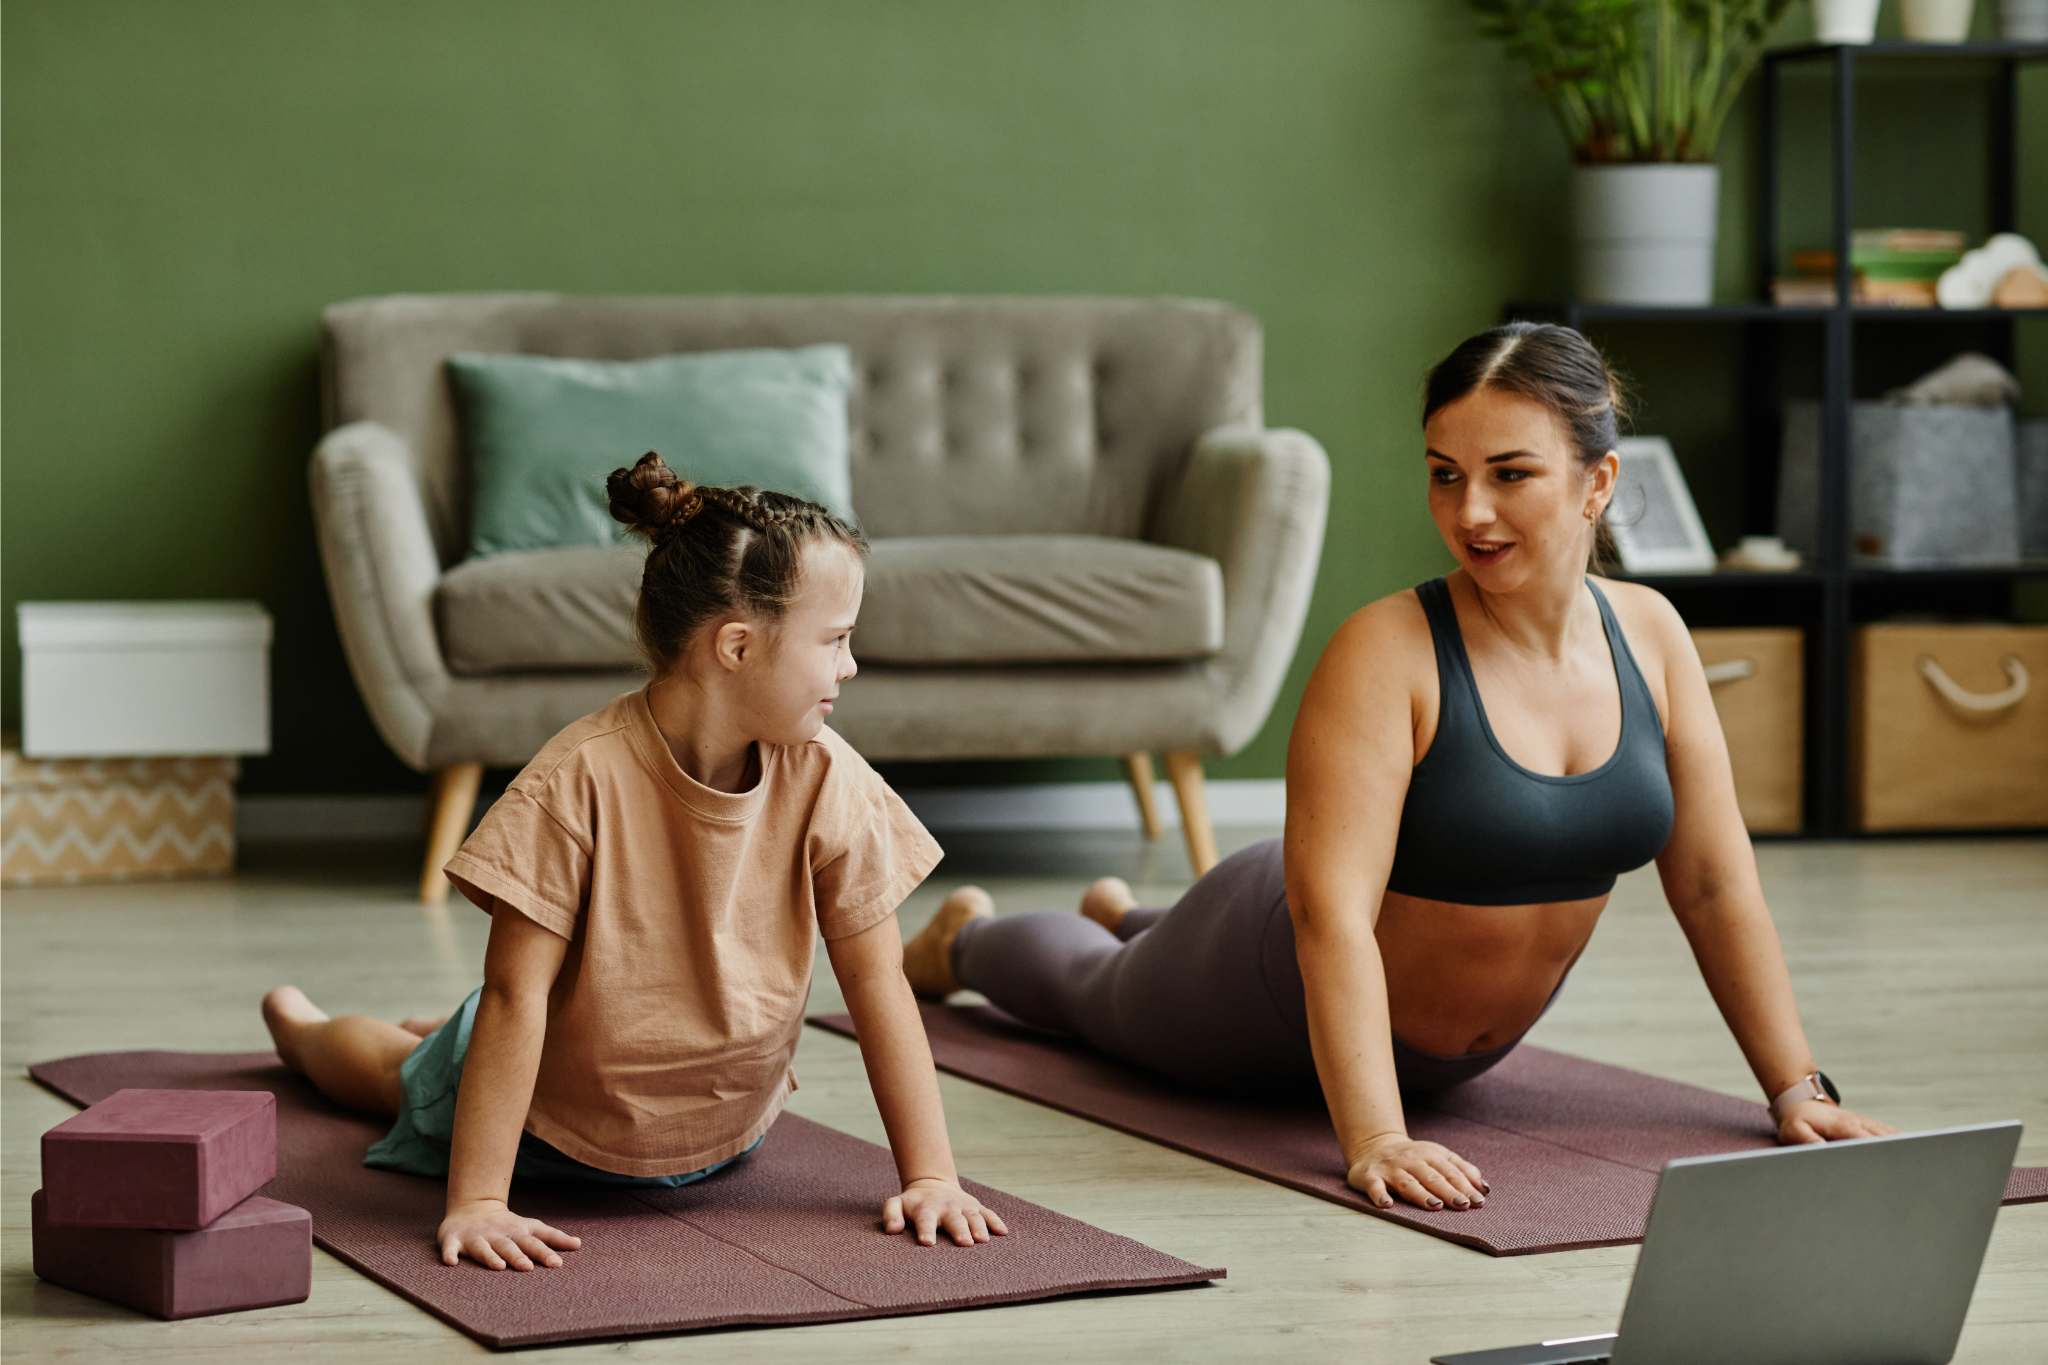 Portrait of young girl with down syndrome enjoying home workout with female instructor assisting